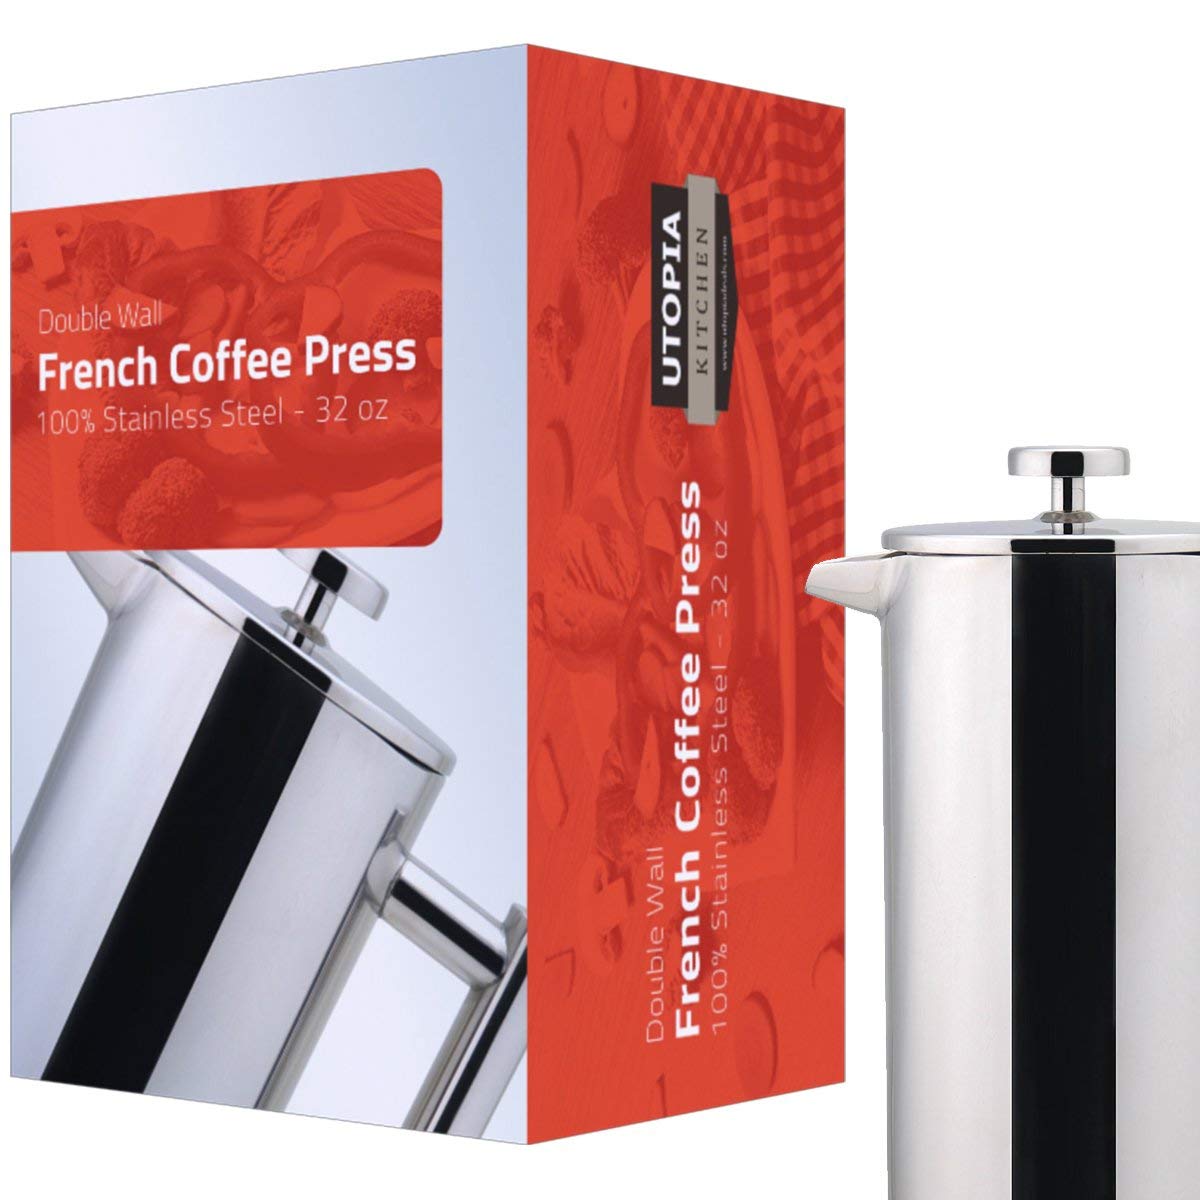 Stainless Steel French Coffee Press (32 oz) by Utopia Kitchen